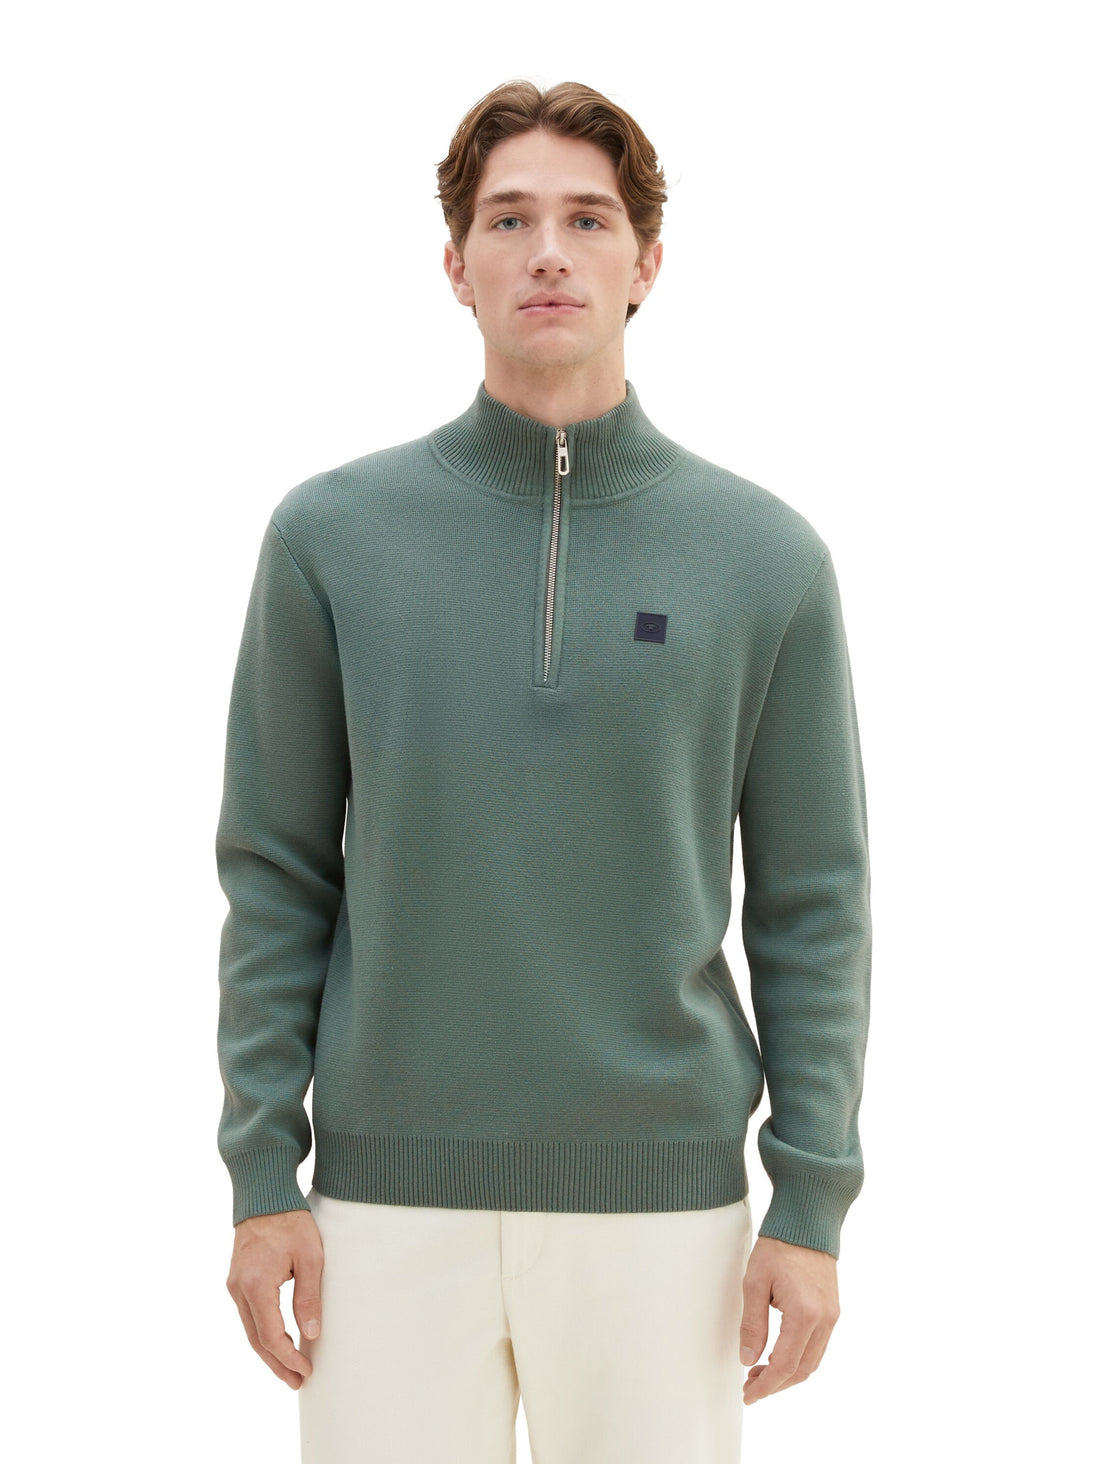 Knitted Sweater With Quarter Zip_1038197_19643_05